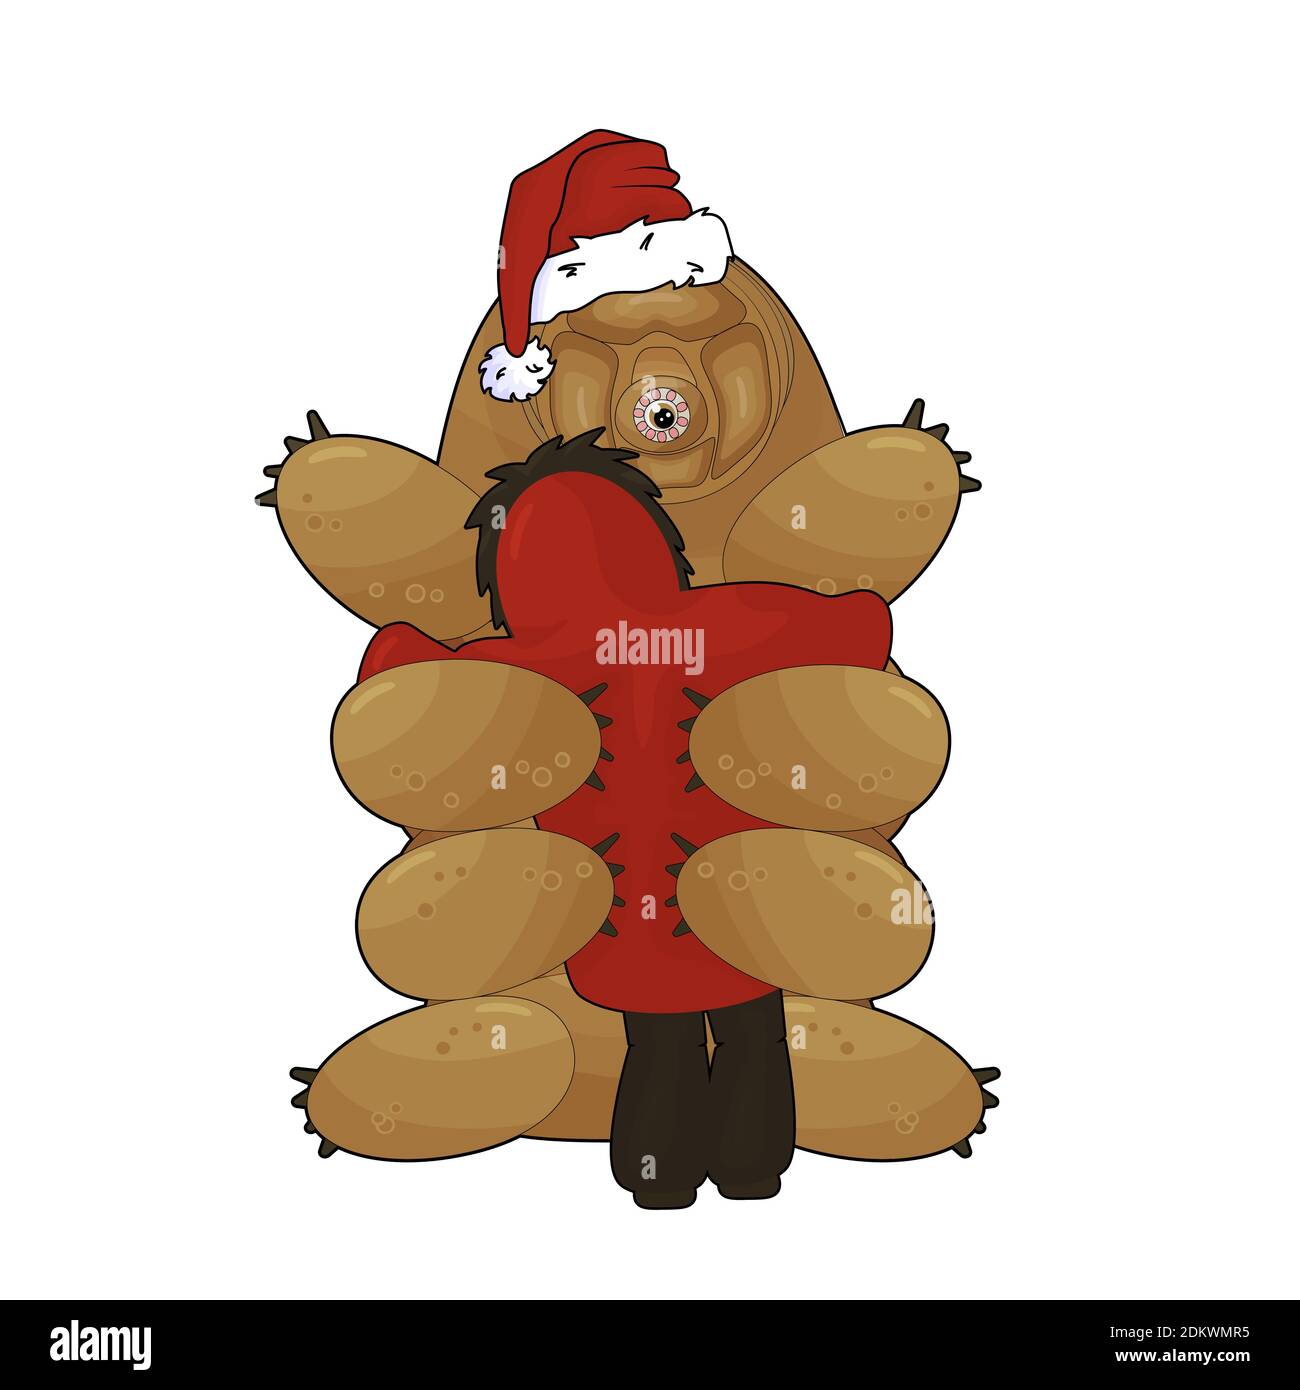 Happy Cartoon Tardigrade with Santa hat sits on the ground and gives a hug to a human in coat Stock Vector